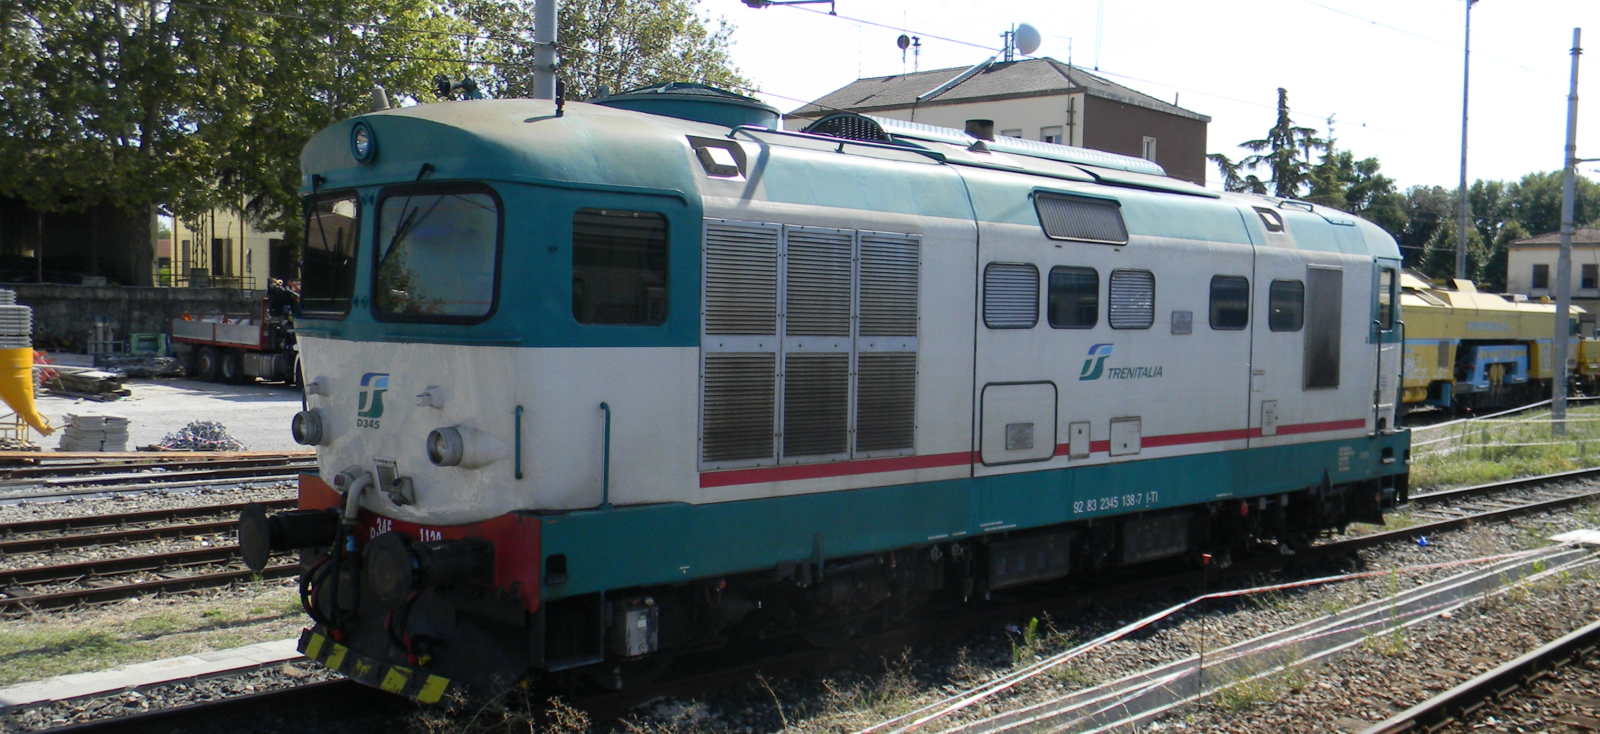 An example in modern livery in August 2013 in Peschiera del Garda